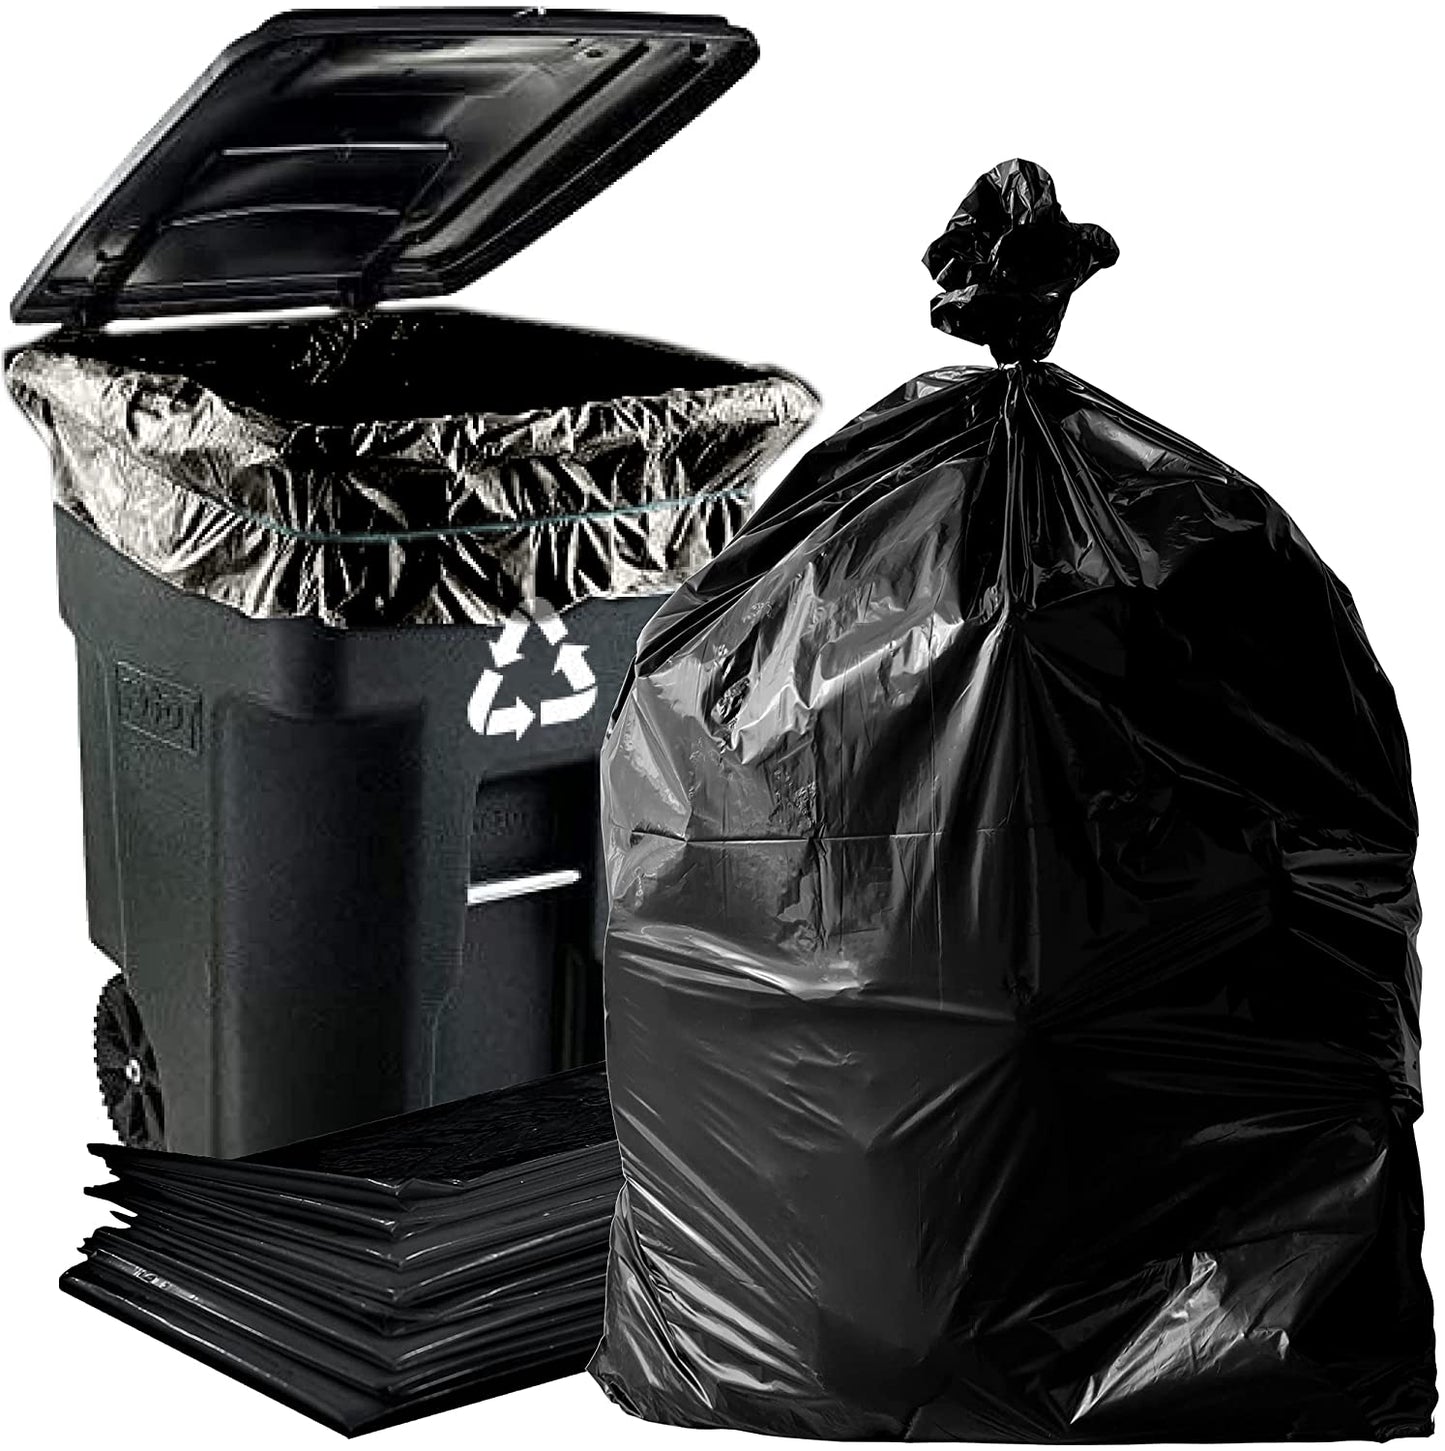 Dyno Products Online 95-96-Gallon, 1.5 Mil Thick Heavy-Duty Black Trash Bags - 25 Count Extra Large Plastic Garbage Liners Fit Huge Cans for Home Garden Lawn Yard Recycling Construction & Commercial Use